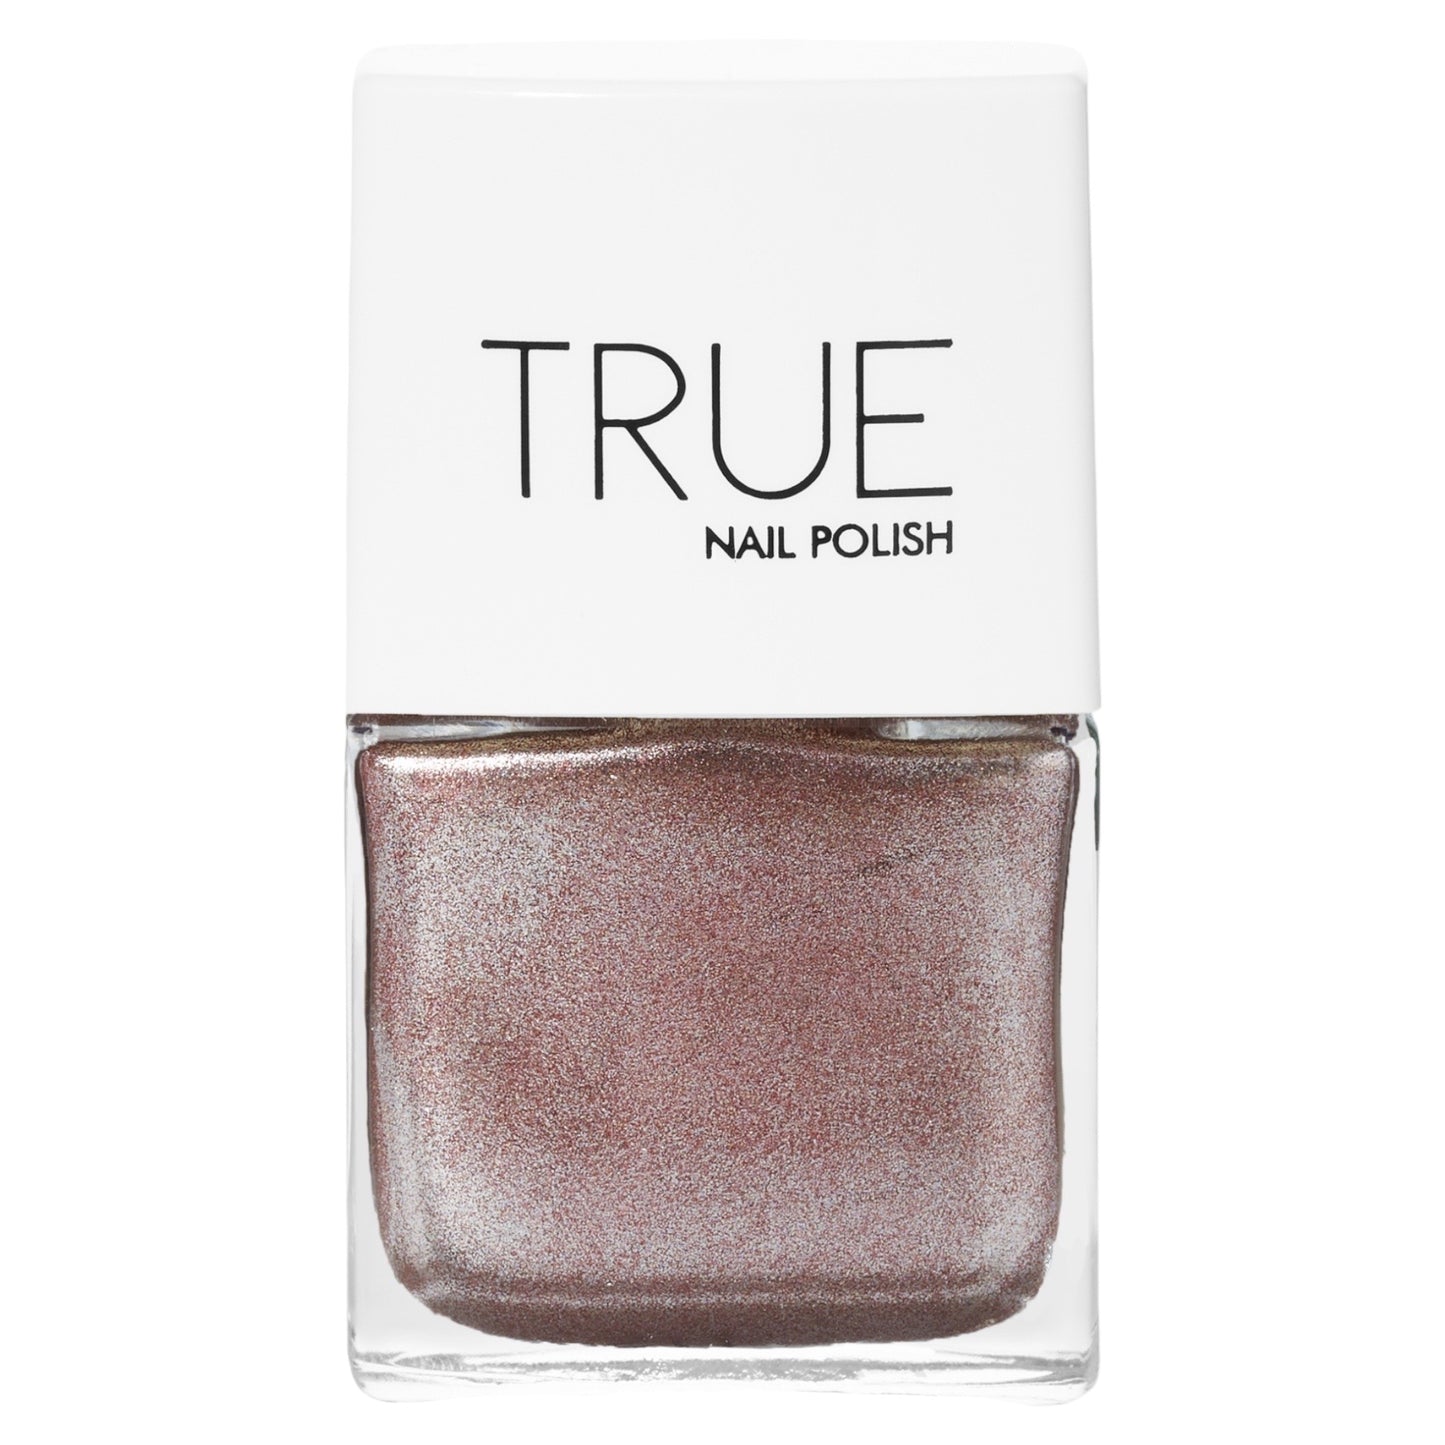 A bottle of Fantasy, a rose gold glitter shade from True Nail Polish